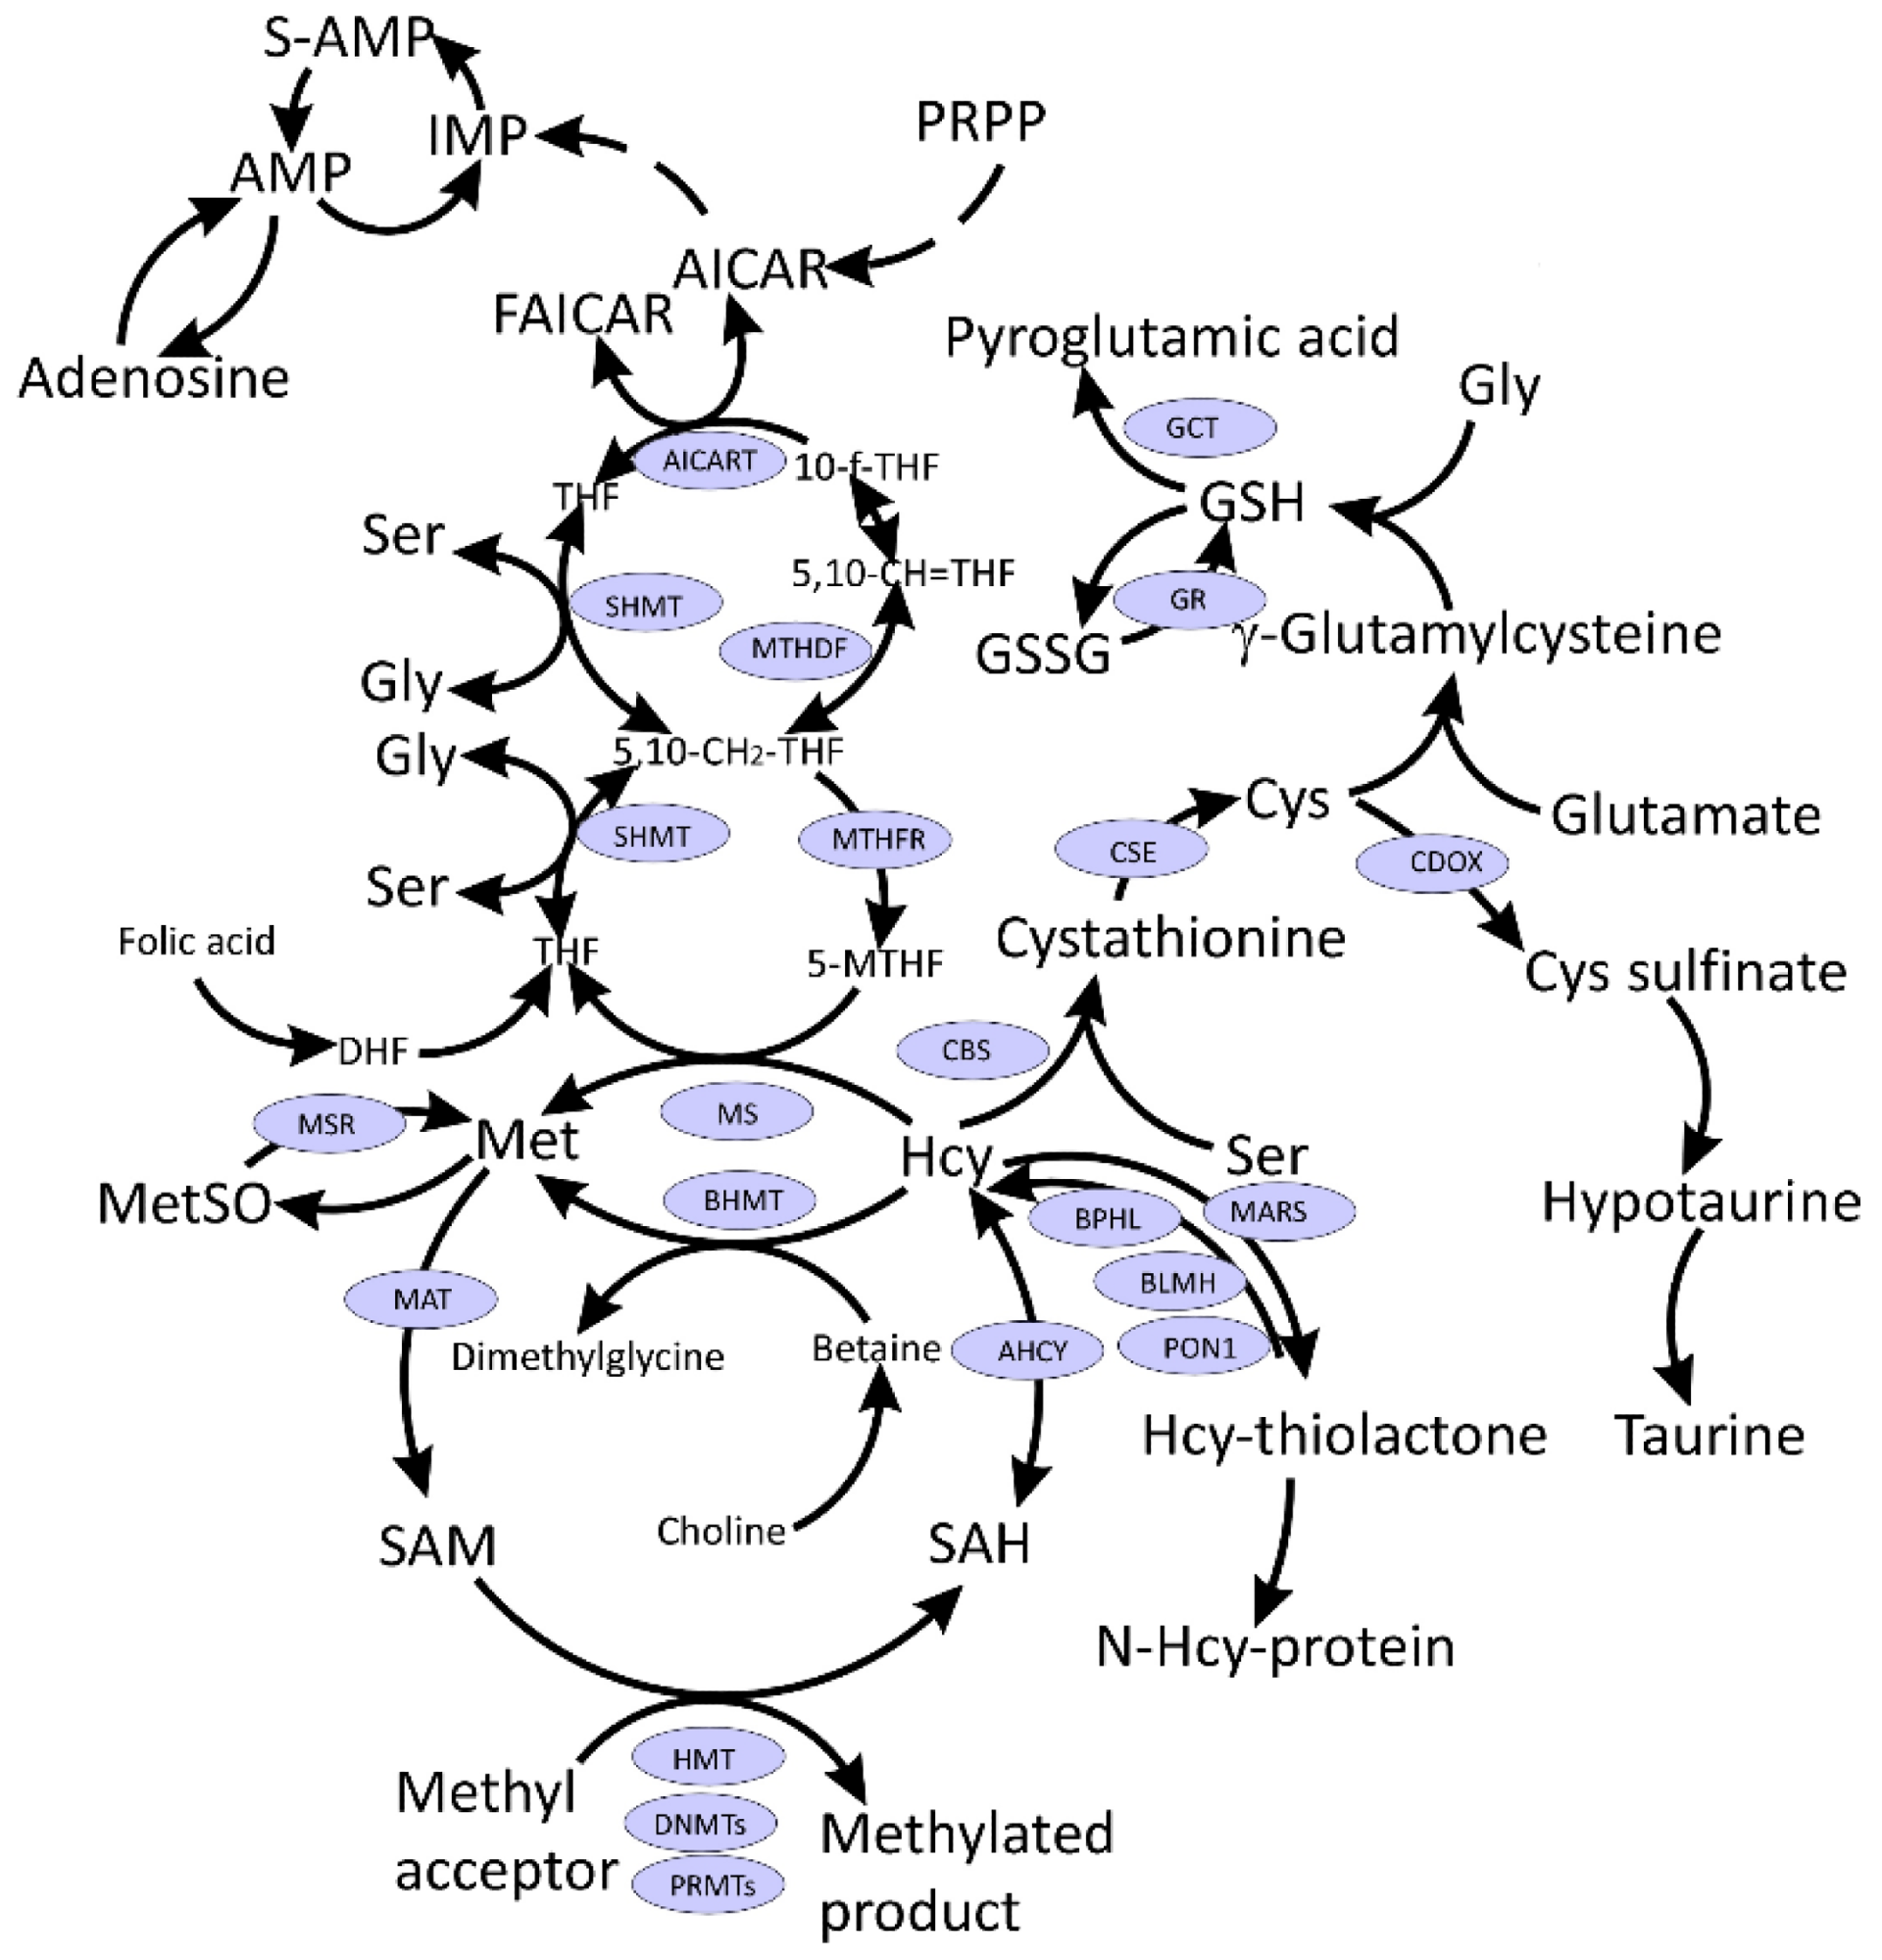 Interconnections between metabolism of folate, one-carbon, and sulfur compounds. Indicated metabolites are discussed in the text. CysGly, a product of GSH catabolism, affected in COVID-19 and discussed in the text, is not shown.